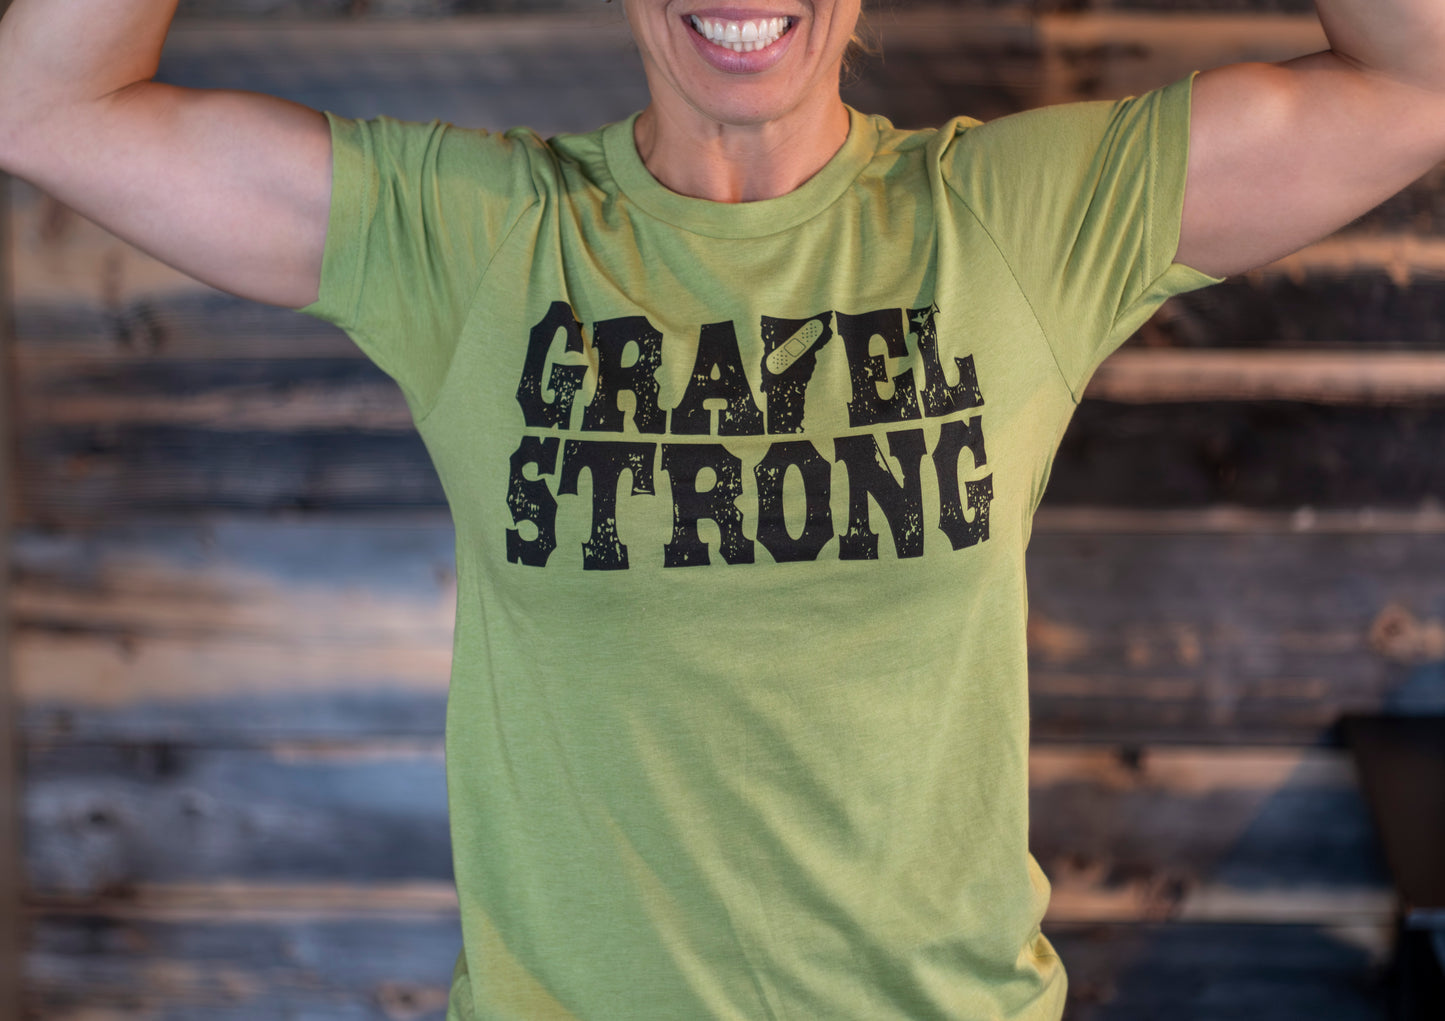 GRAVEL STRONG Shirt - Support Vermont Flood Relief